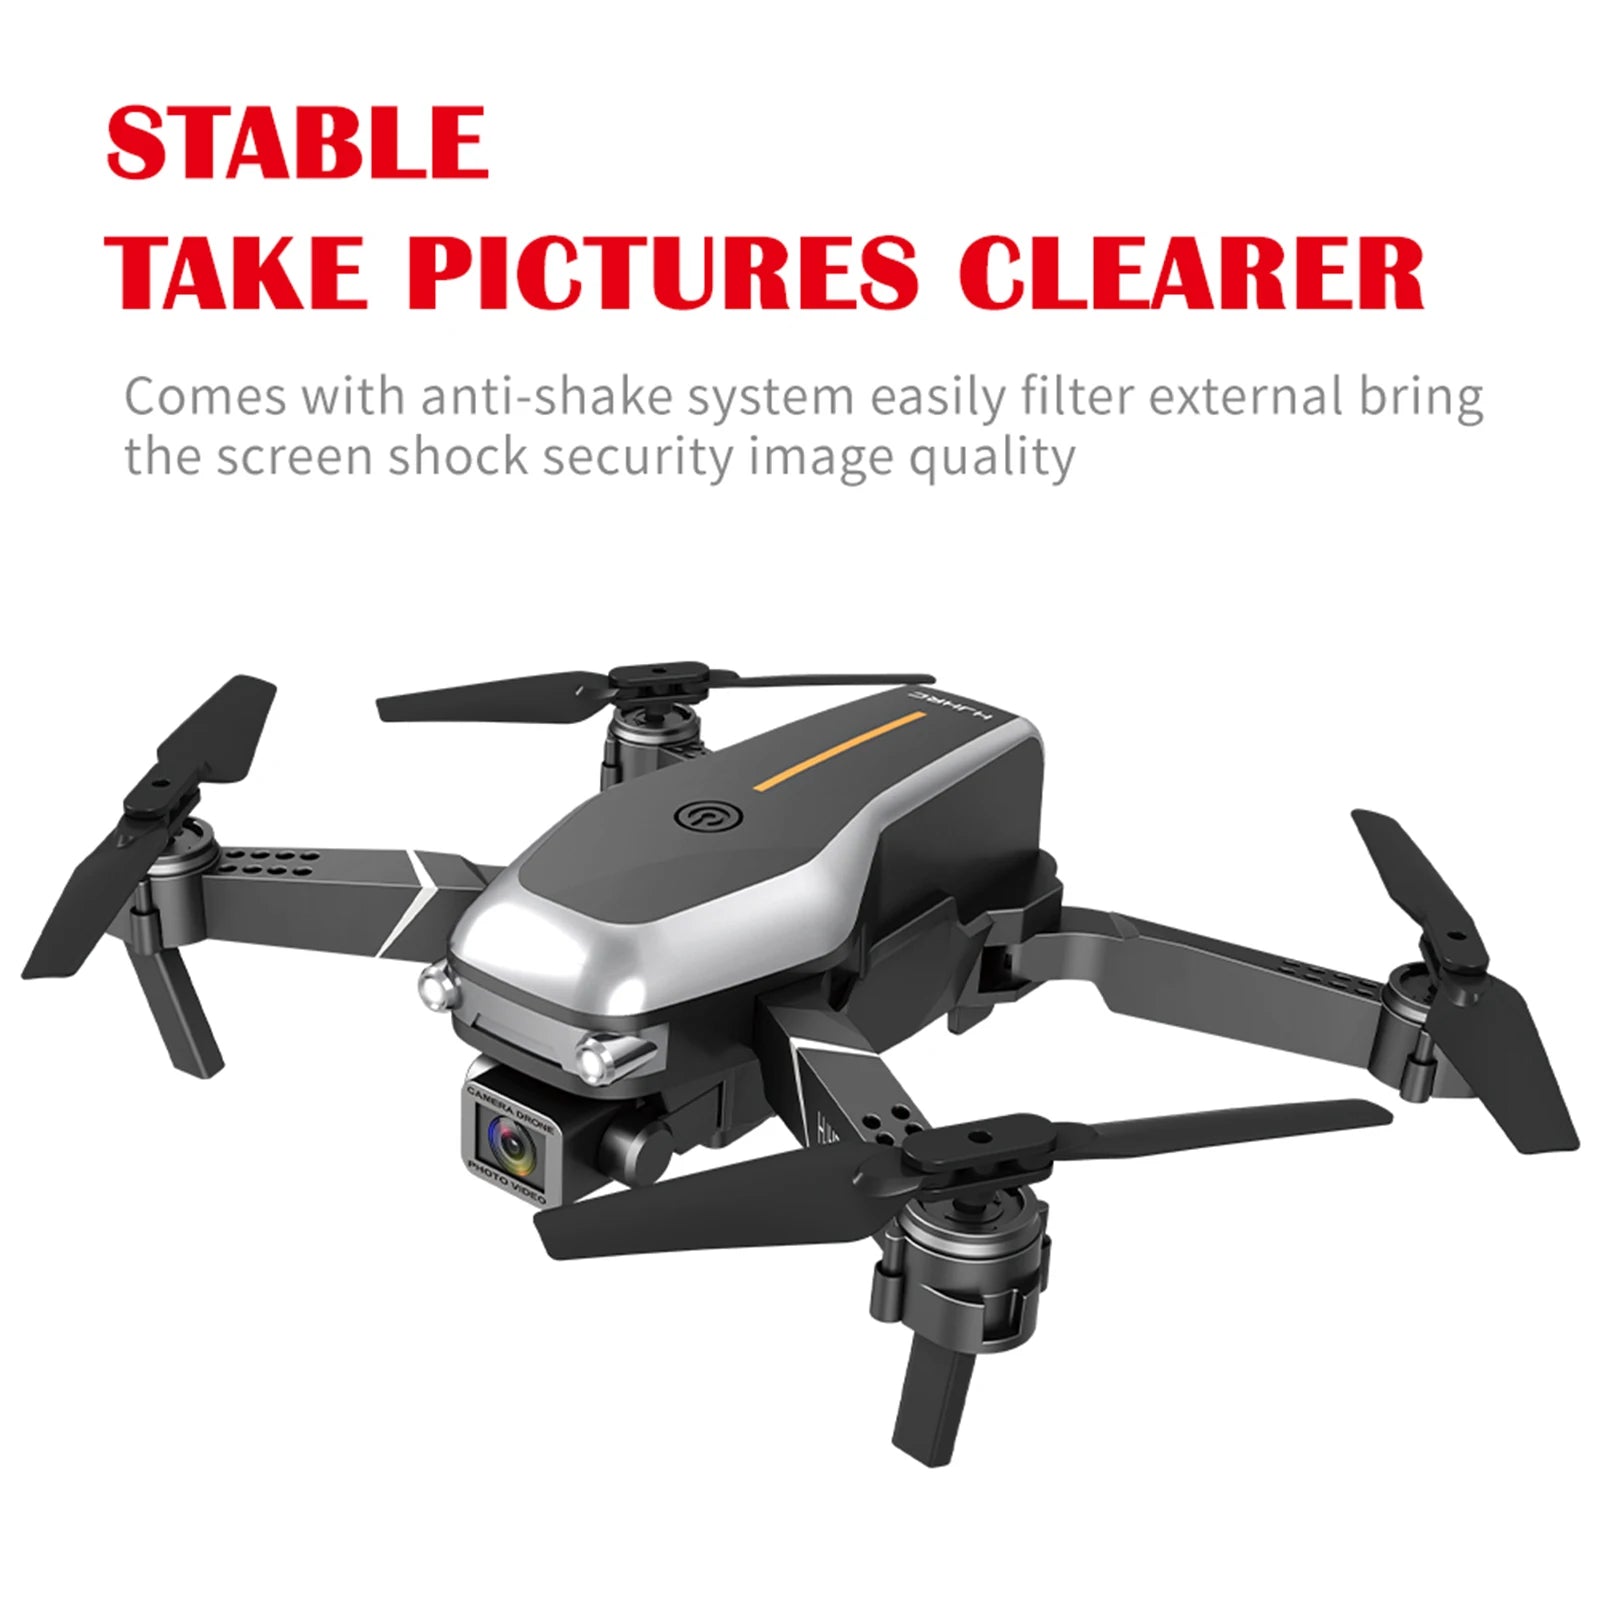 HJ95 Drone, stable take pictures clearer comes with anti-shake system easily filter external